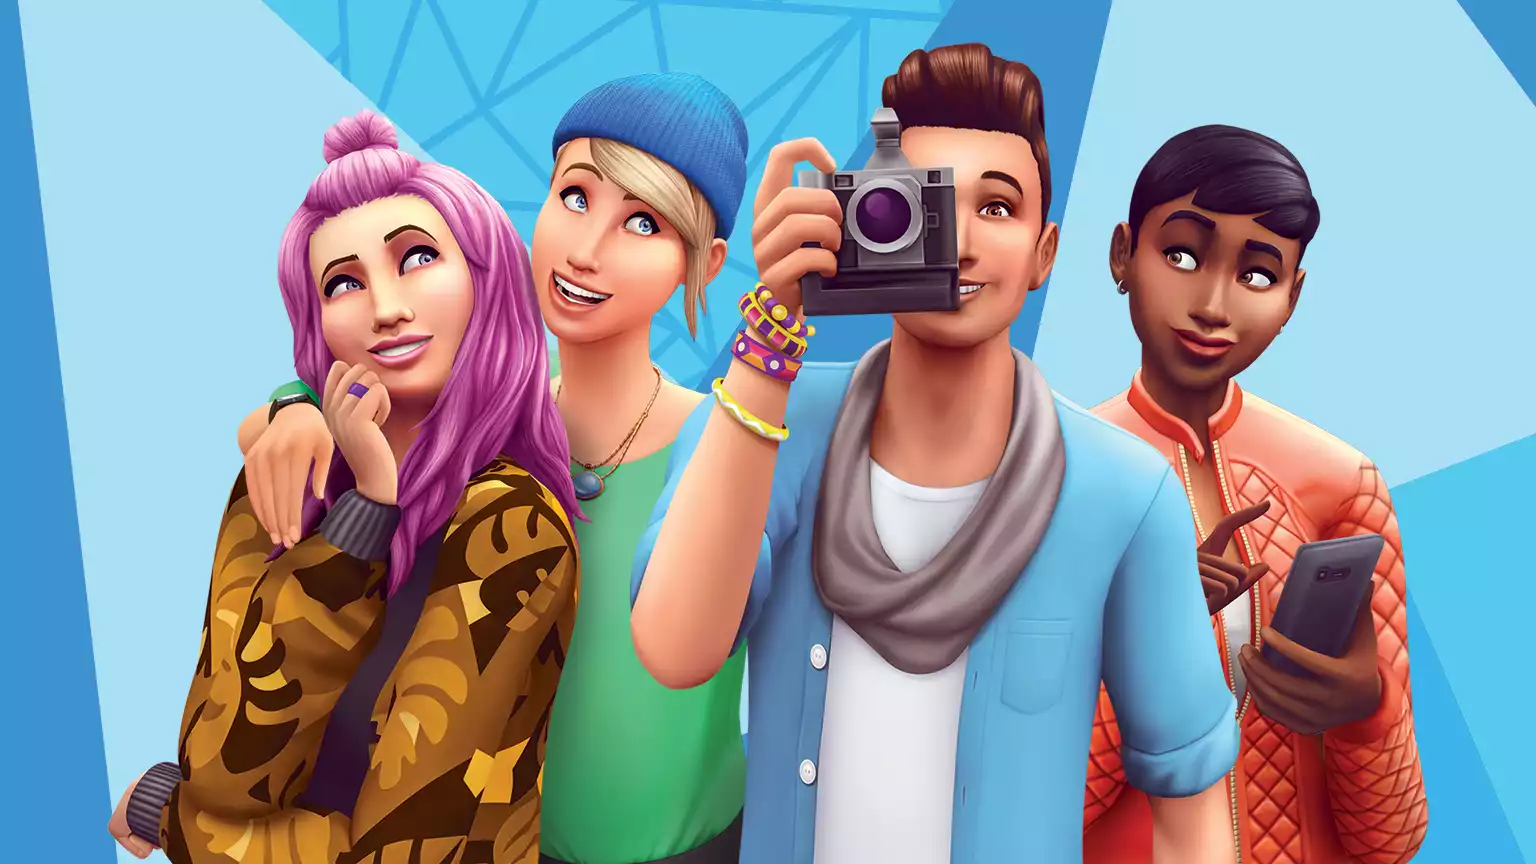 19 best games like The Sims to play in 2023, including Animal Crossing, Stardew Valley & more